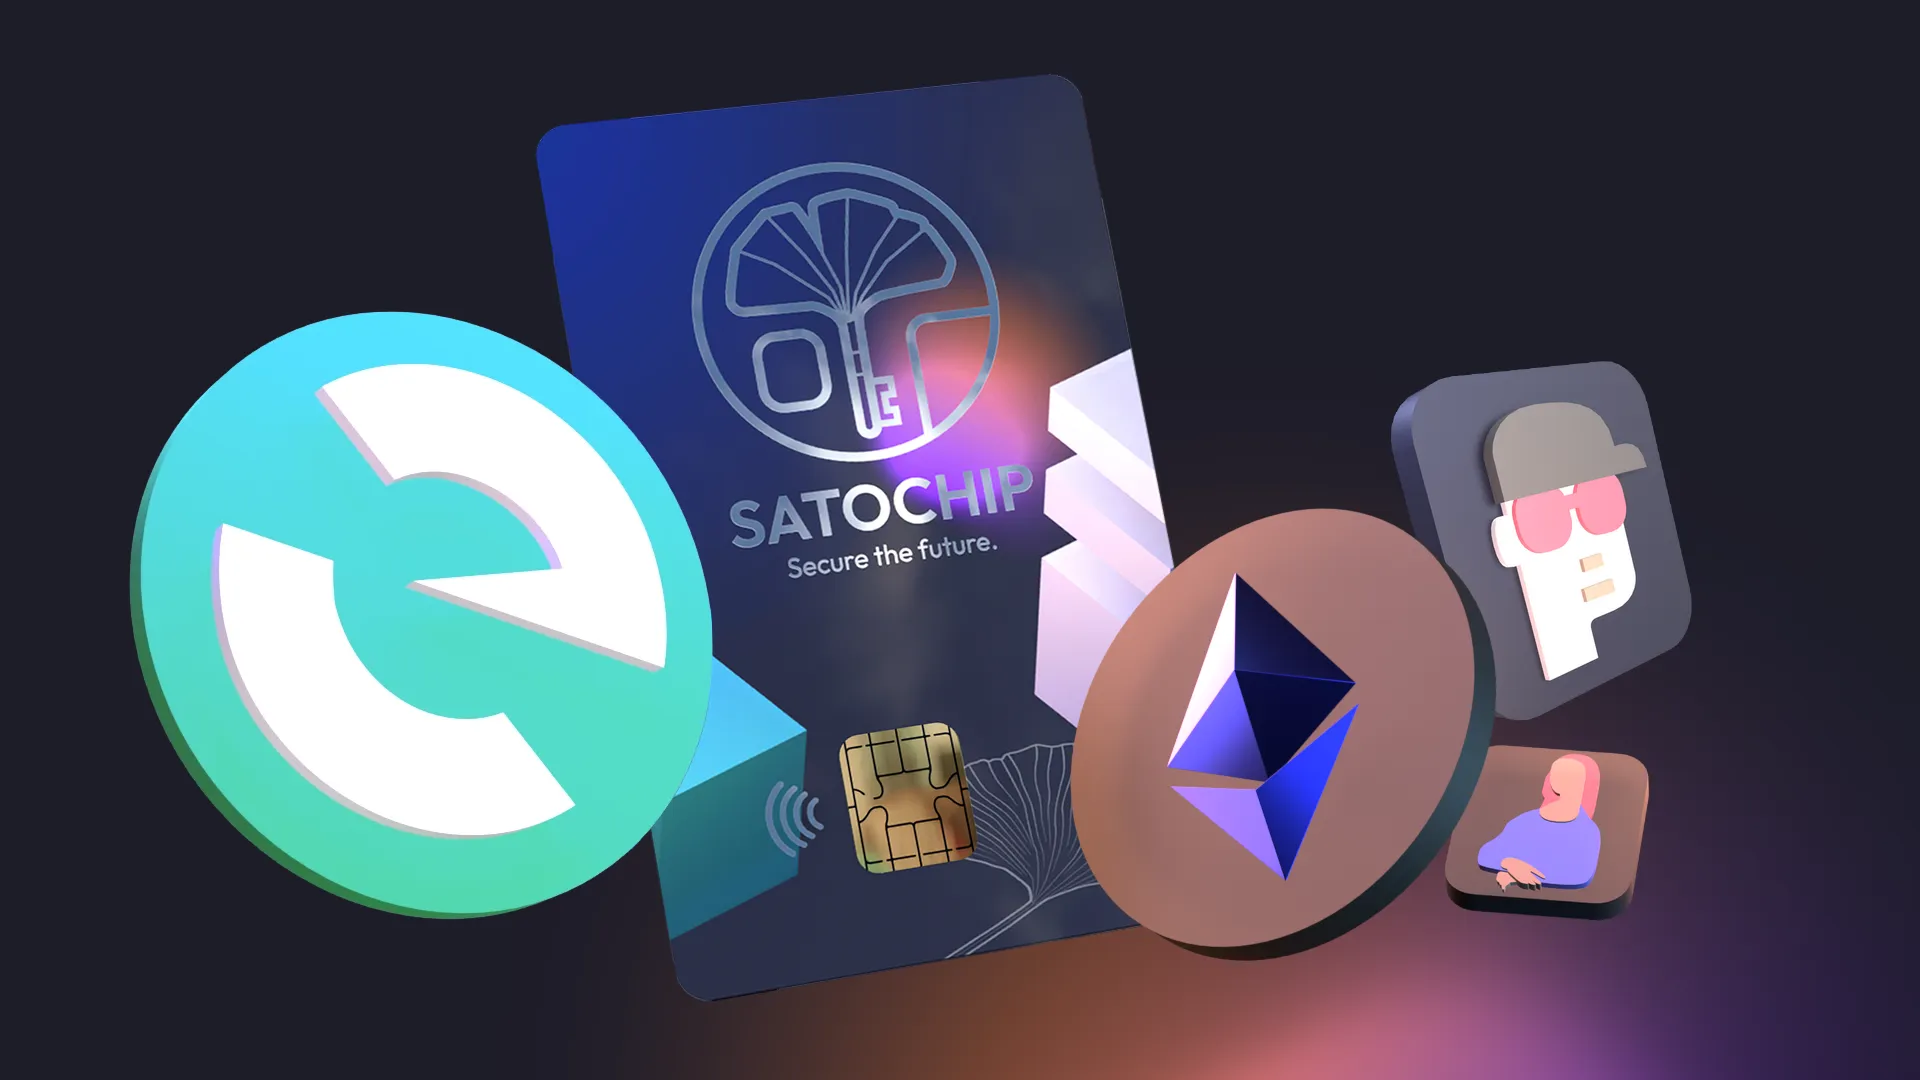 Satochip does support MyEtherWallet for Ehereum, ERC-20 tokens and EVM compatible networks.